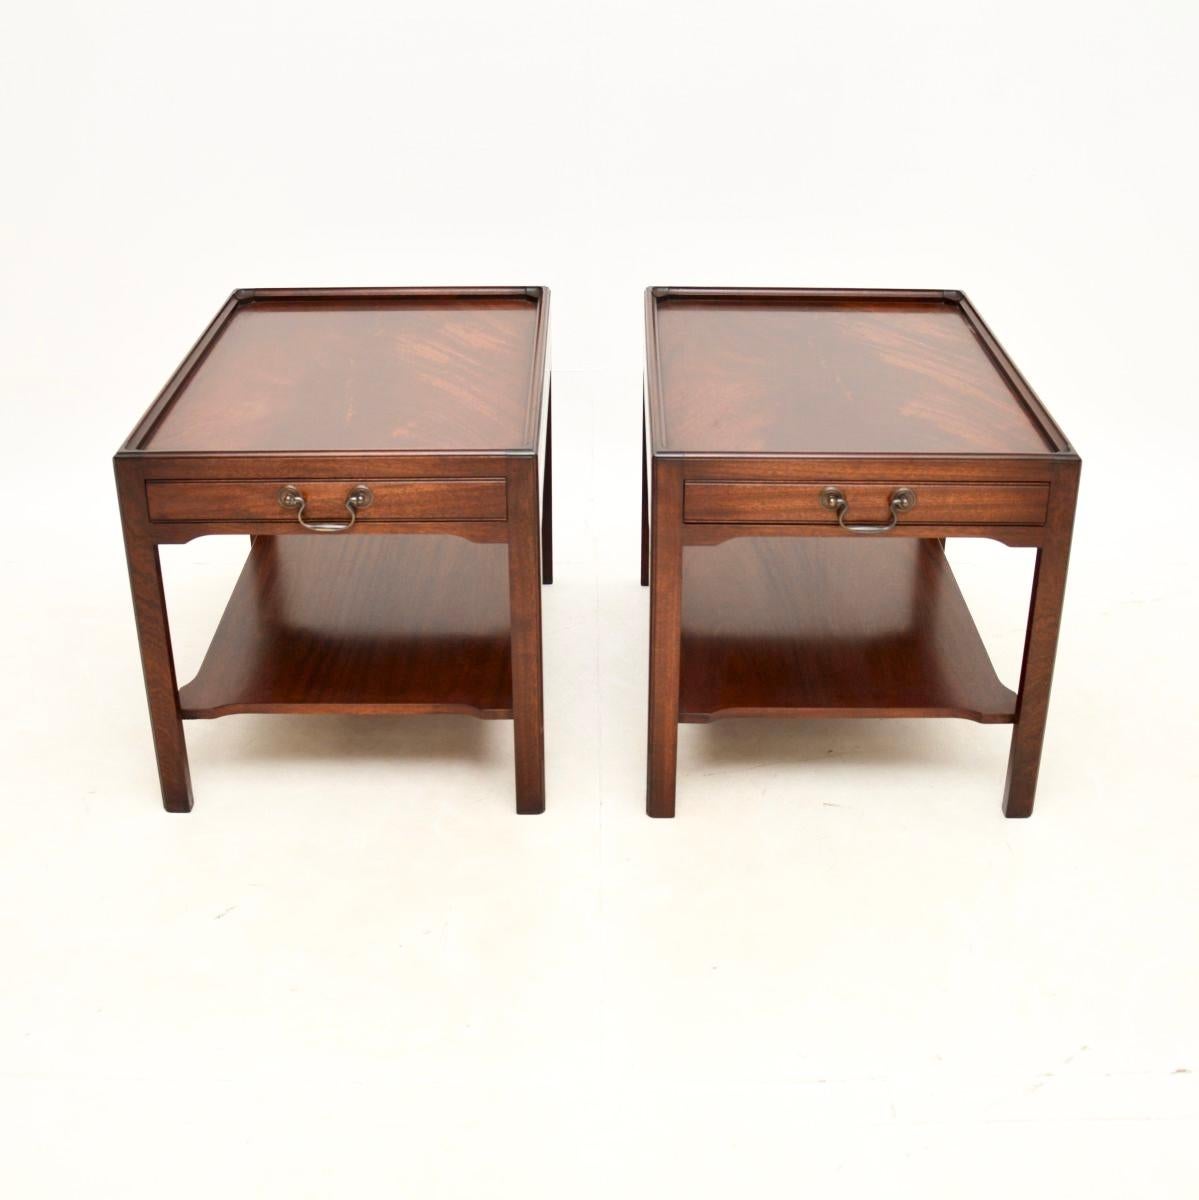 A very well made and useful pair of antique Georgian style side tables. They were made in England, and date from around the 1950’s.

They are of super quality and have a very practical design. The tops have raised edges with a single drawer in each